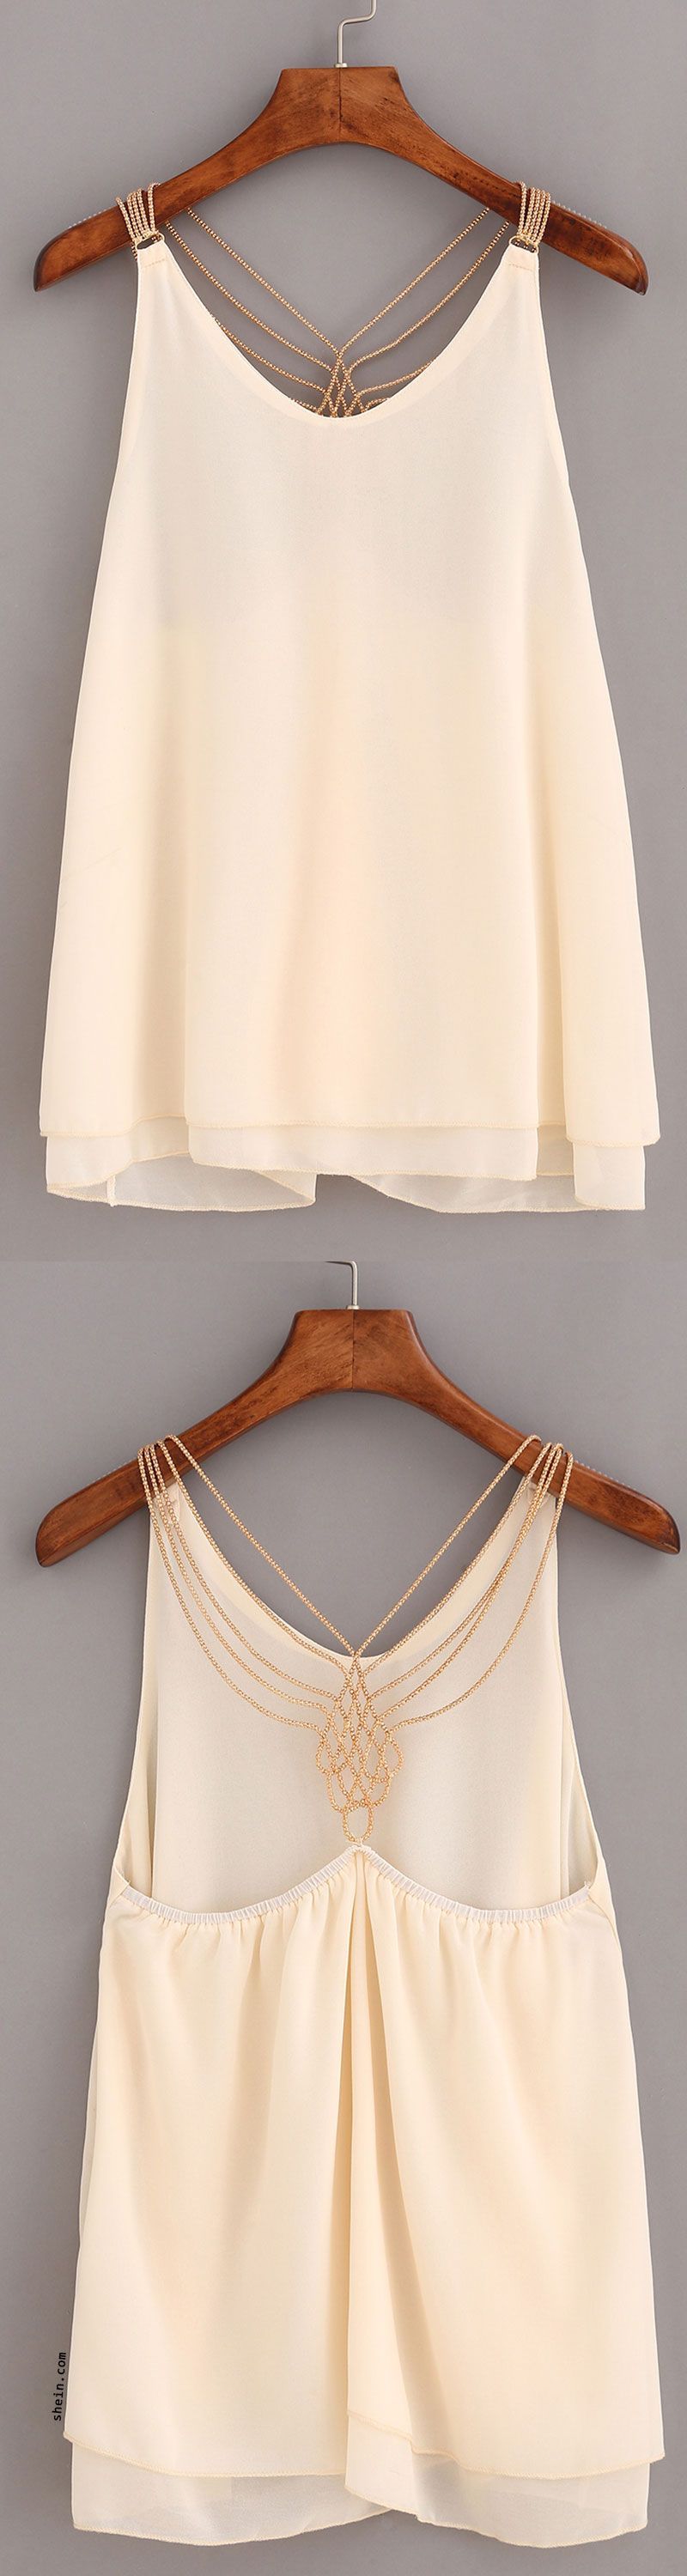 Apricot Beaded Racerback Chiffon Top. It looks amazing over white ripped skinny jeans and cowboy boots.